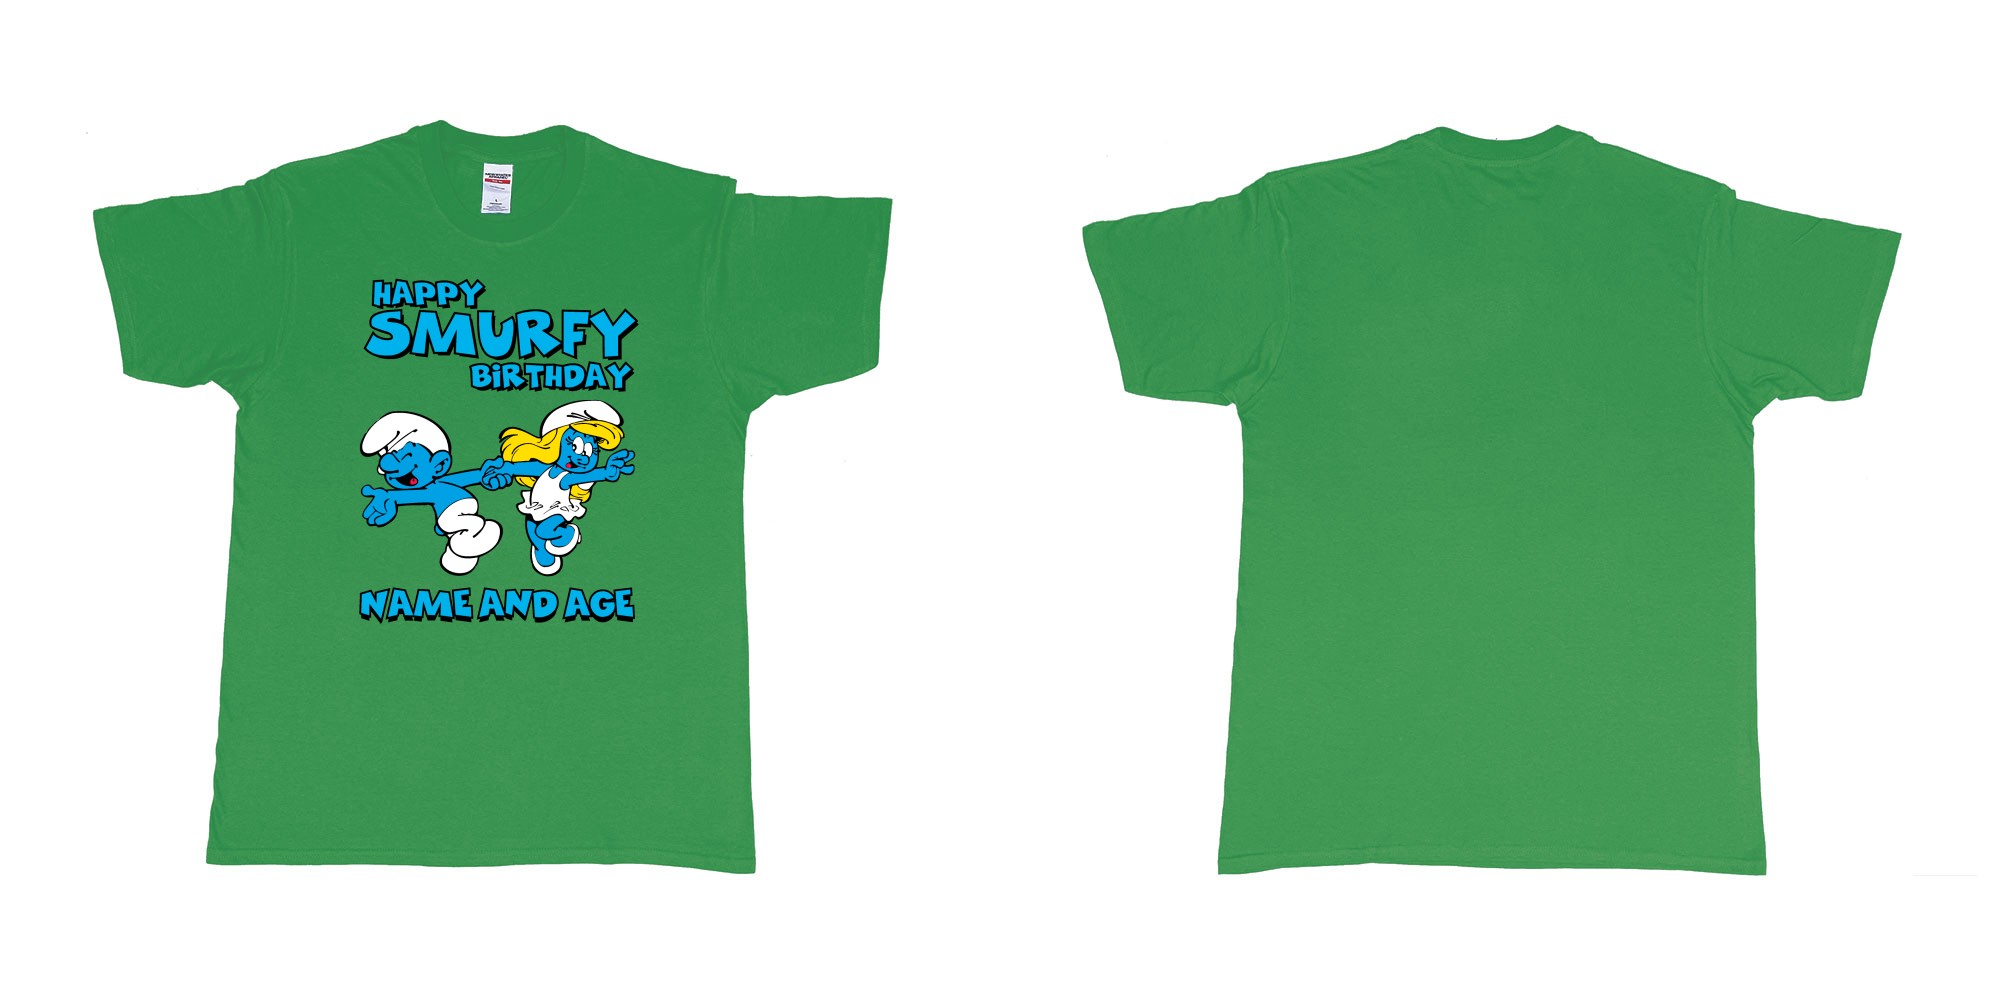 Custom tshirt design happy smurfy birthday in fabric color irish-green choice your own text made in Bali by The Pirate Way